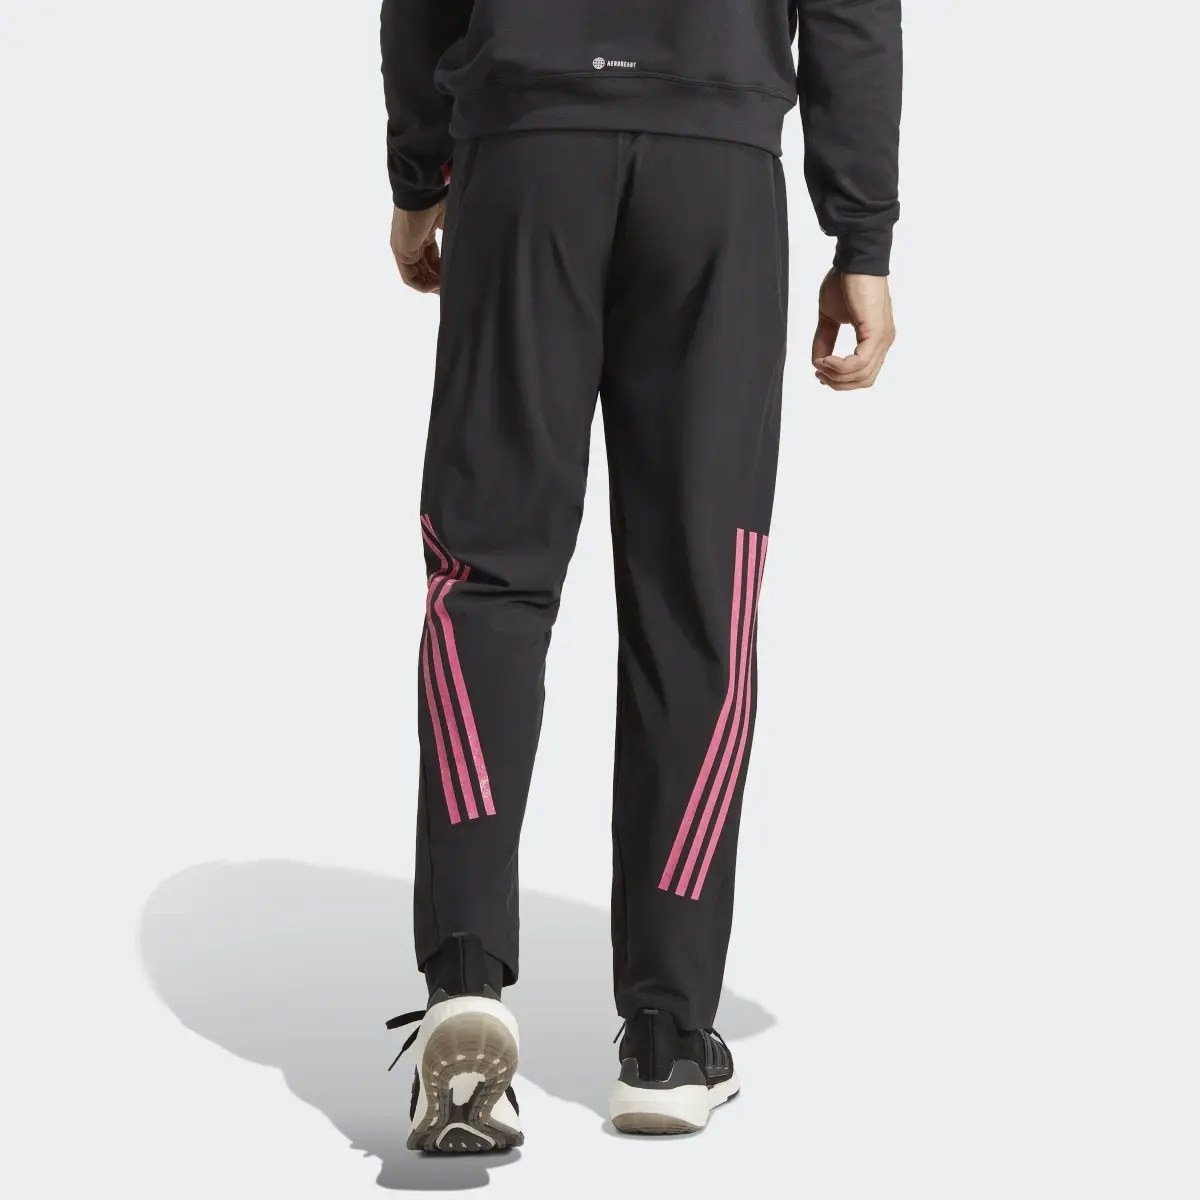 Adidas Pantalon HIIT Curated By Cody Rigsby. 2